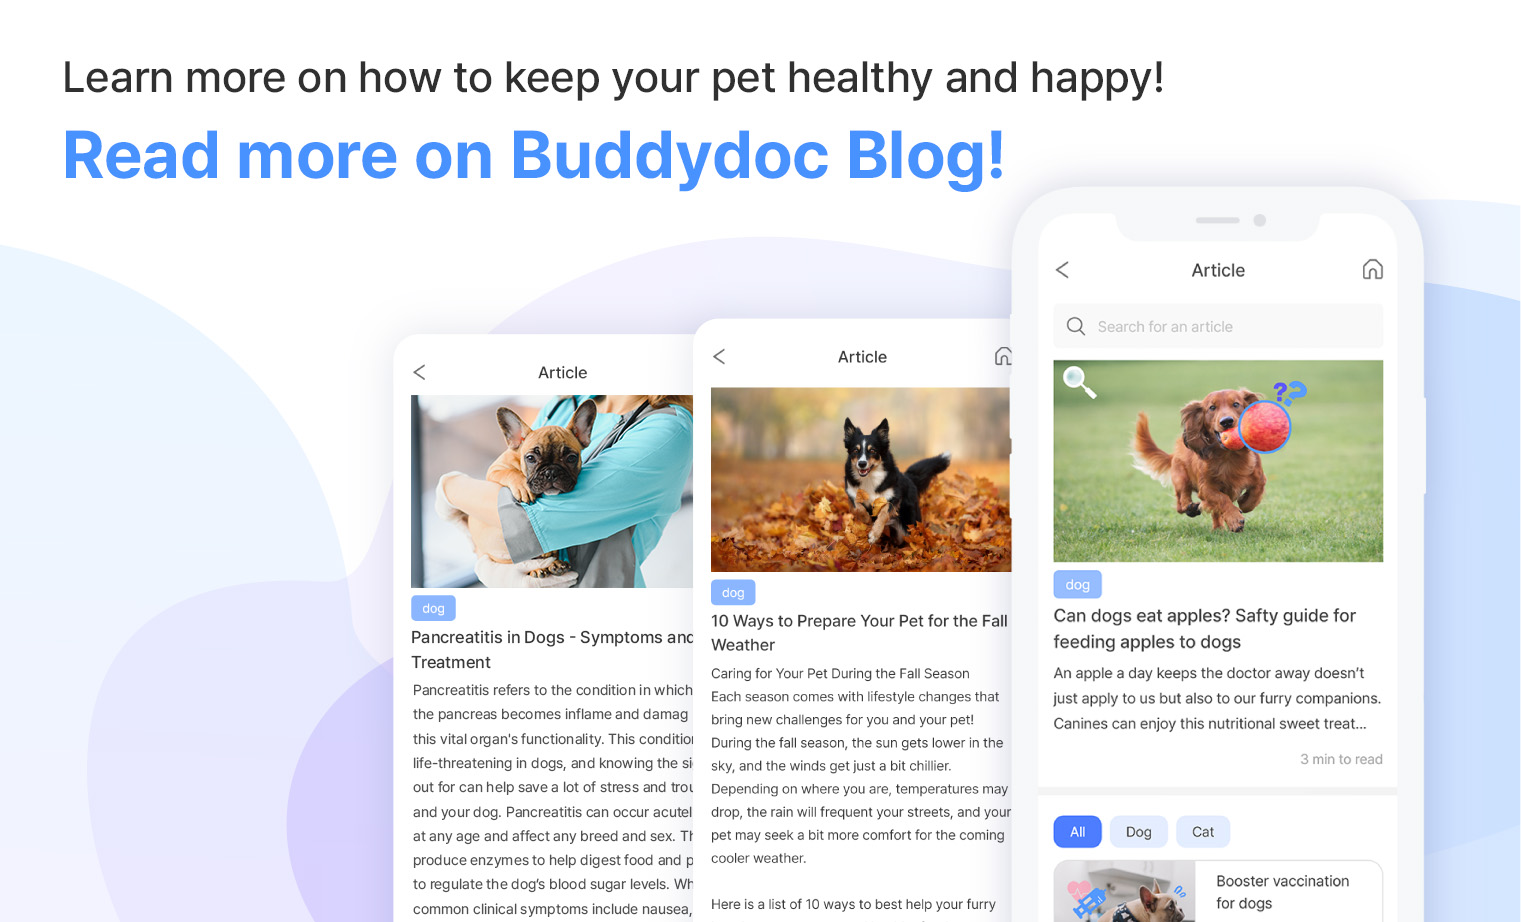 Read more on the Buddydoc blog page!